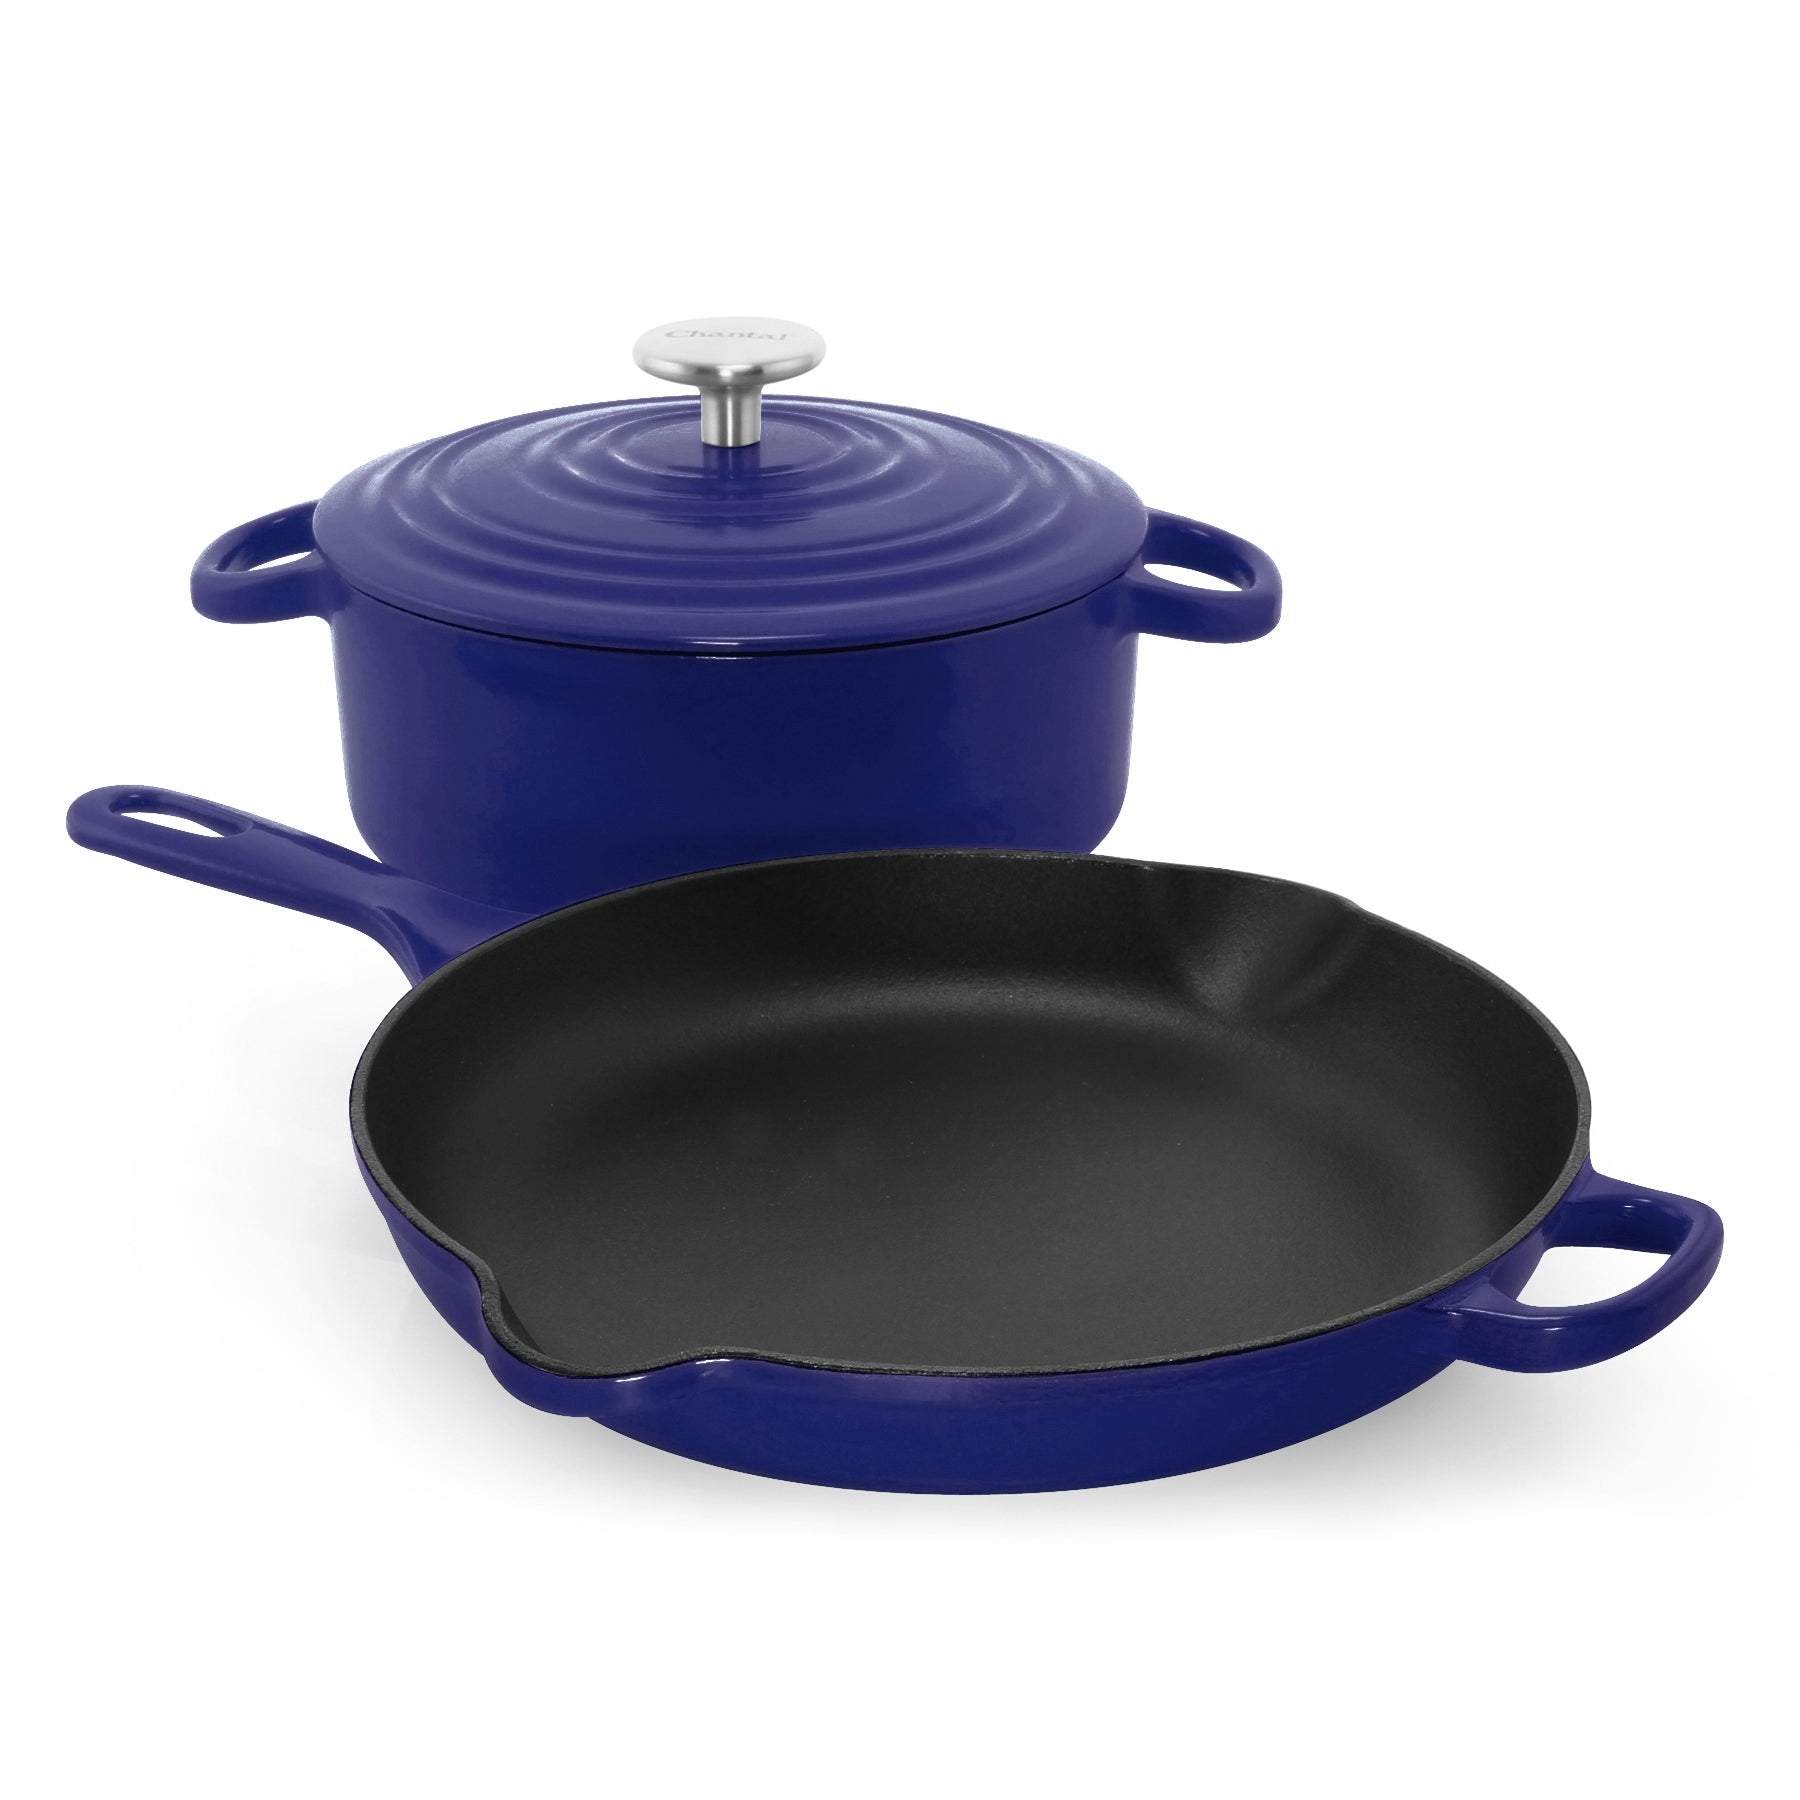 Cast Iron 2-In-1 Skillet Set, Heavy Duty 3.2 Quart Enamel Cookware Pot and  Lid Set, Deep Saucepan and Shallow Skillet Dutch Oven